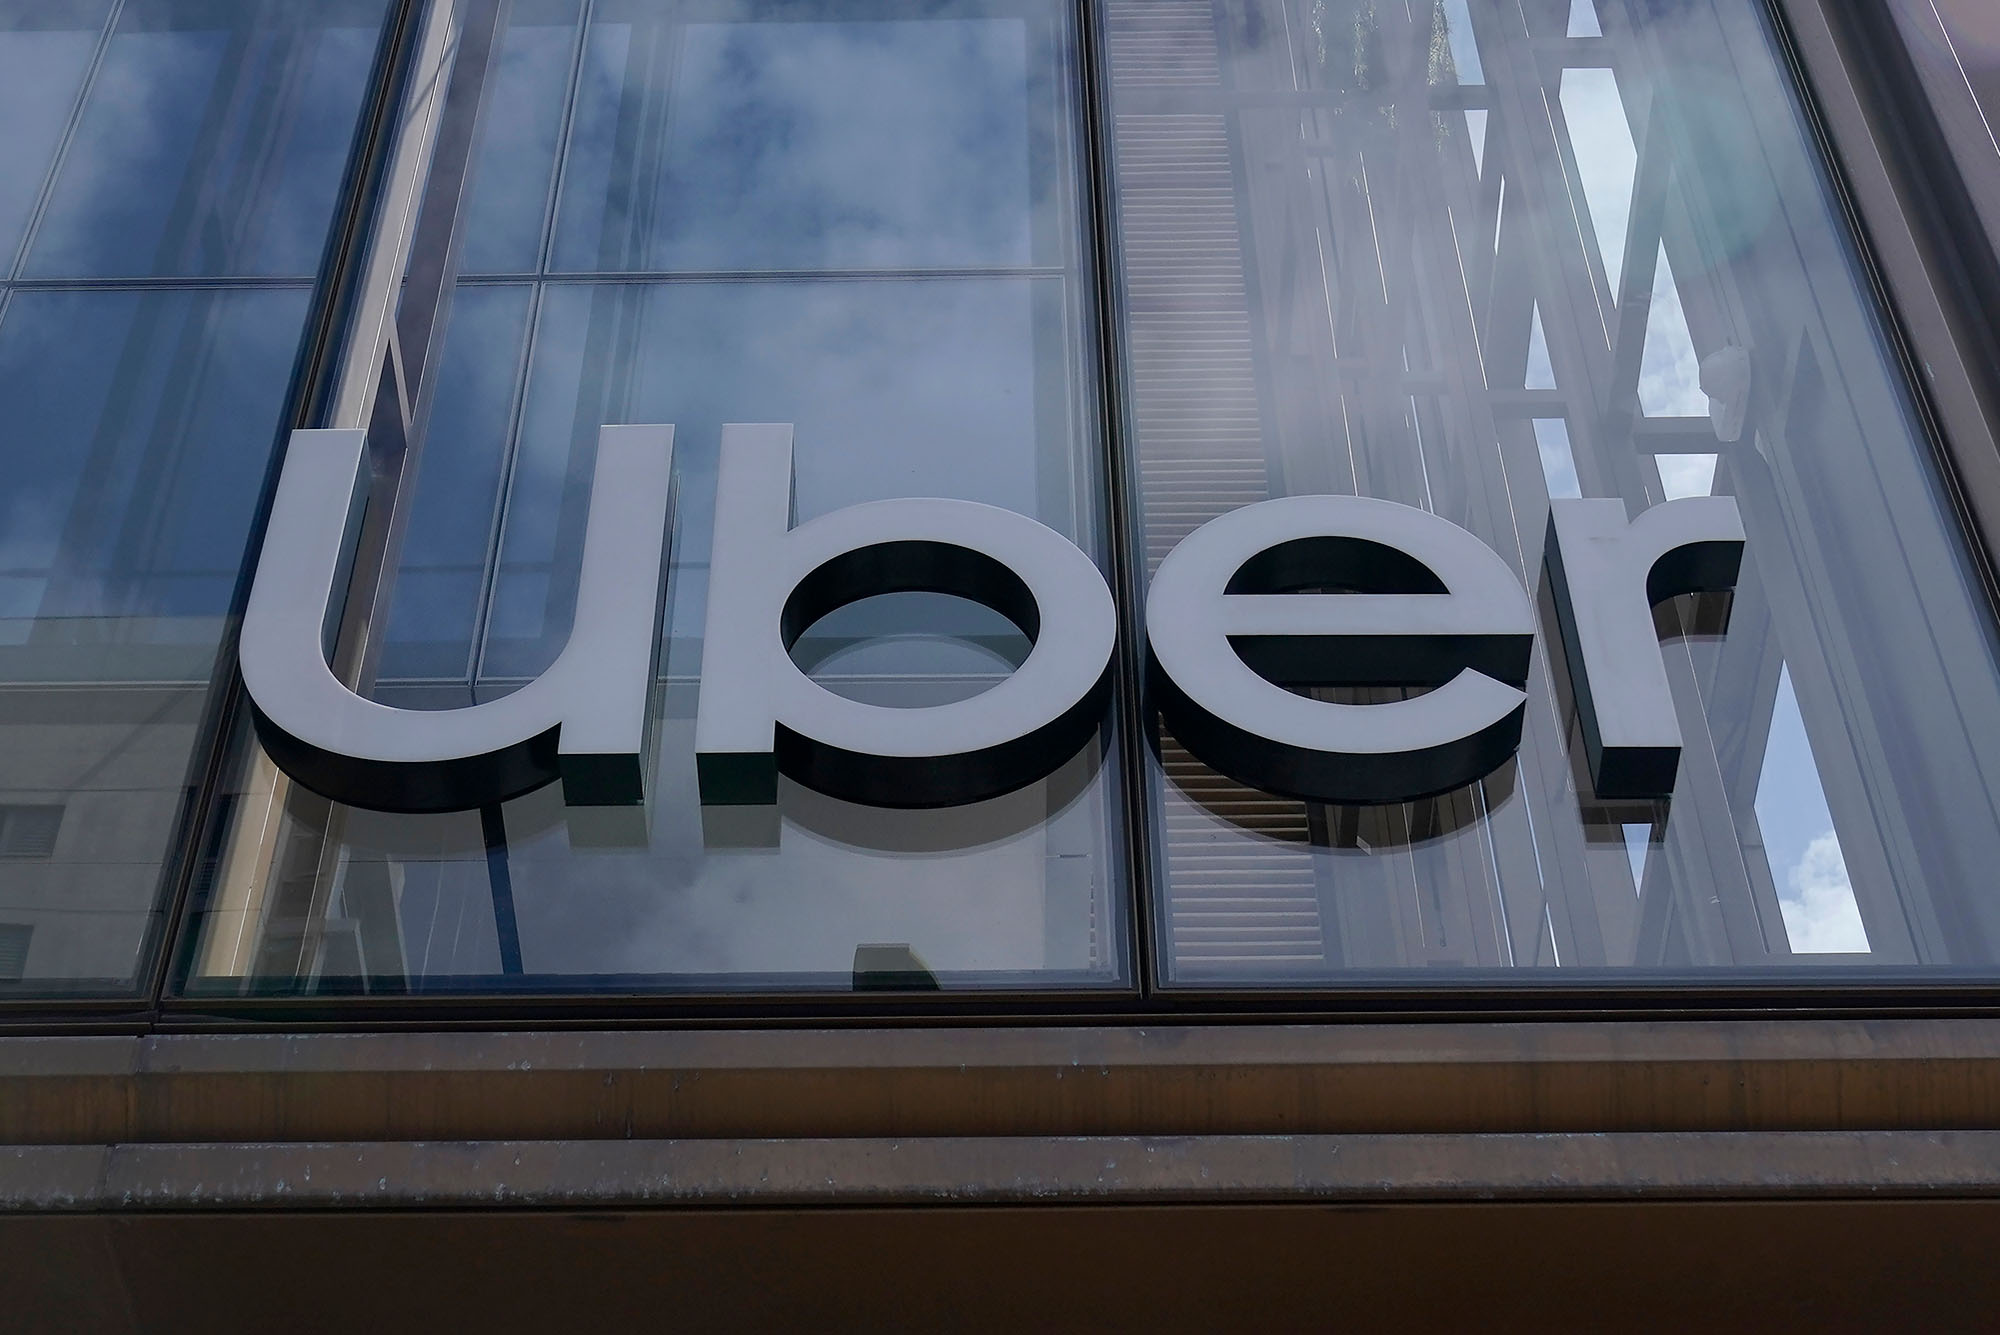 Photo of an Uber sign is displayed at the company's headquarters in San Francisco. Metal sign reads "Uber" on a glass-paned building.